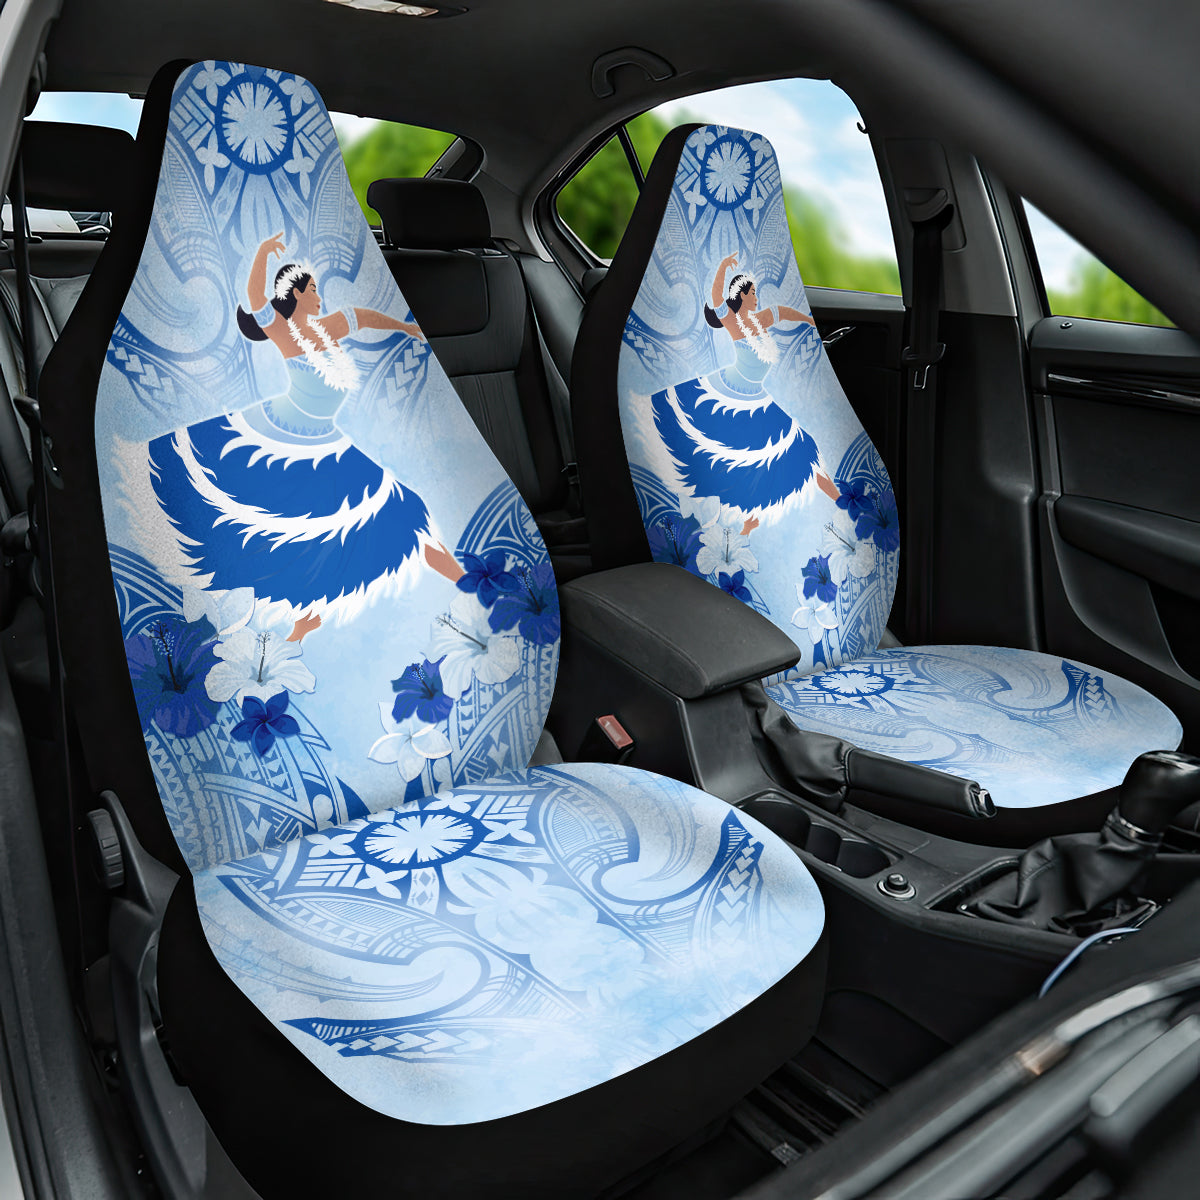 Cook Islands Women's Day Car Seat Cover With Polynesian Pattern